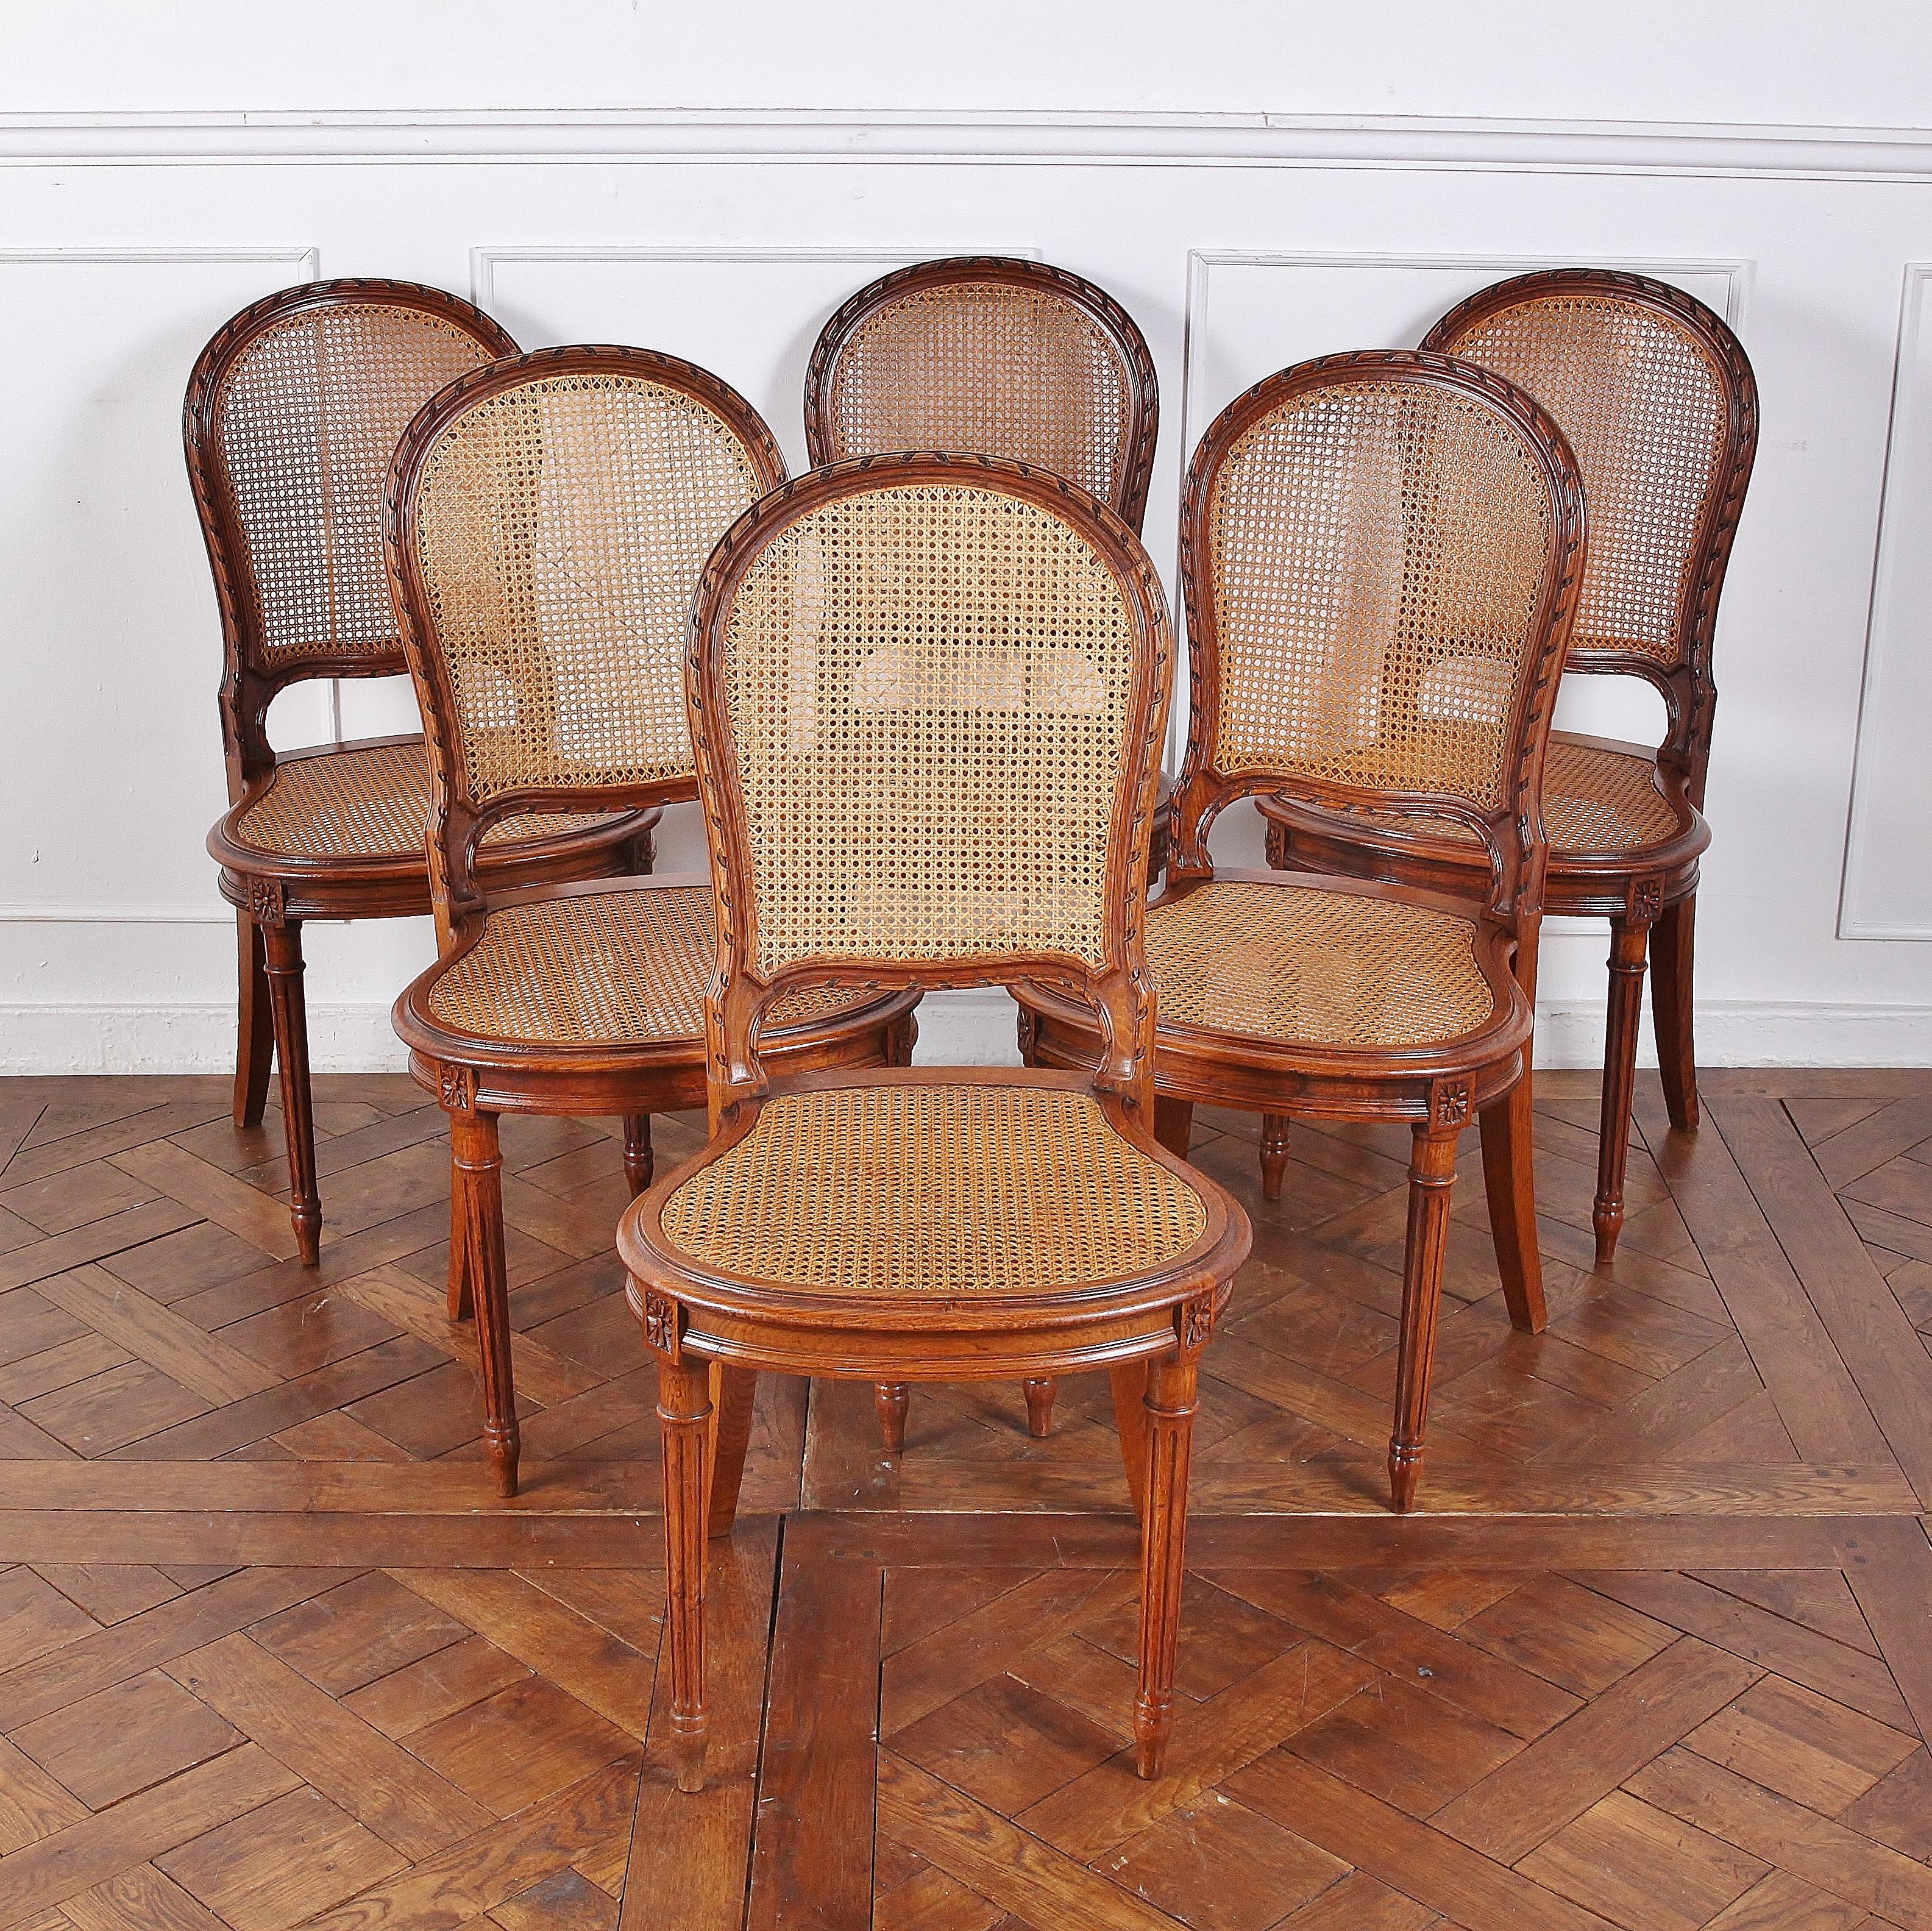 A set of six, late 19th century, Louis XVI-style chairs with cane seats and backs. The curved backs are particularly well-carved, with a fine ribbon motif along their edges; the seats are similarly rounded and raised on elegant turned and fluted